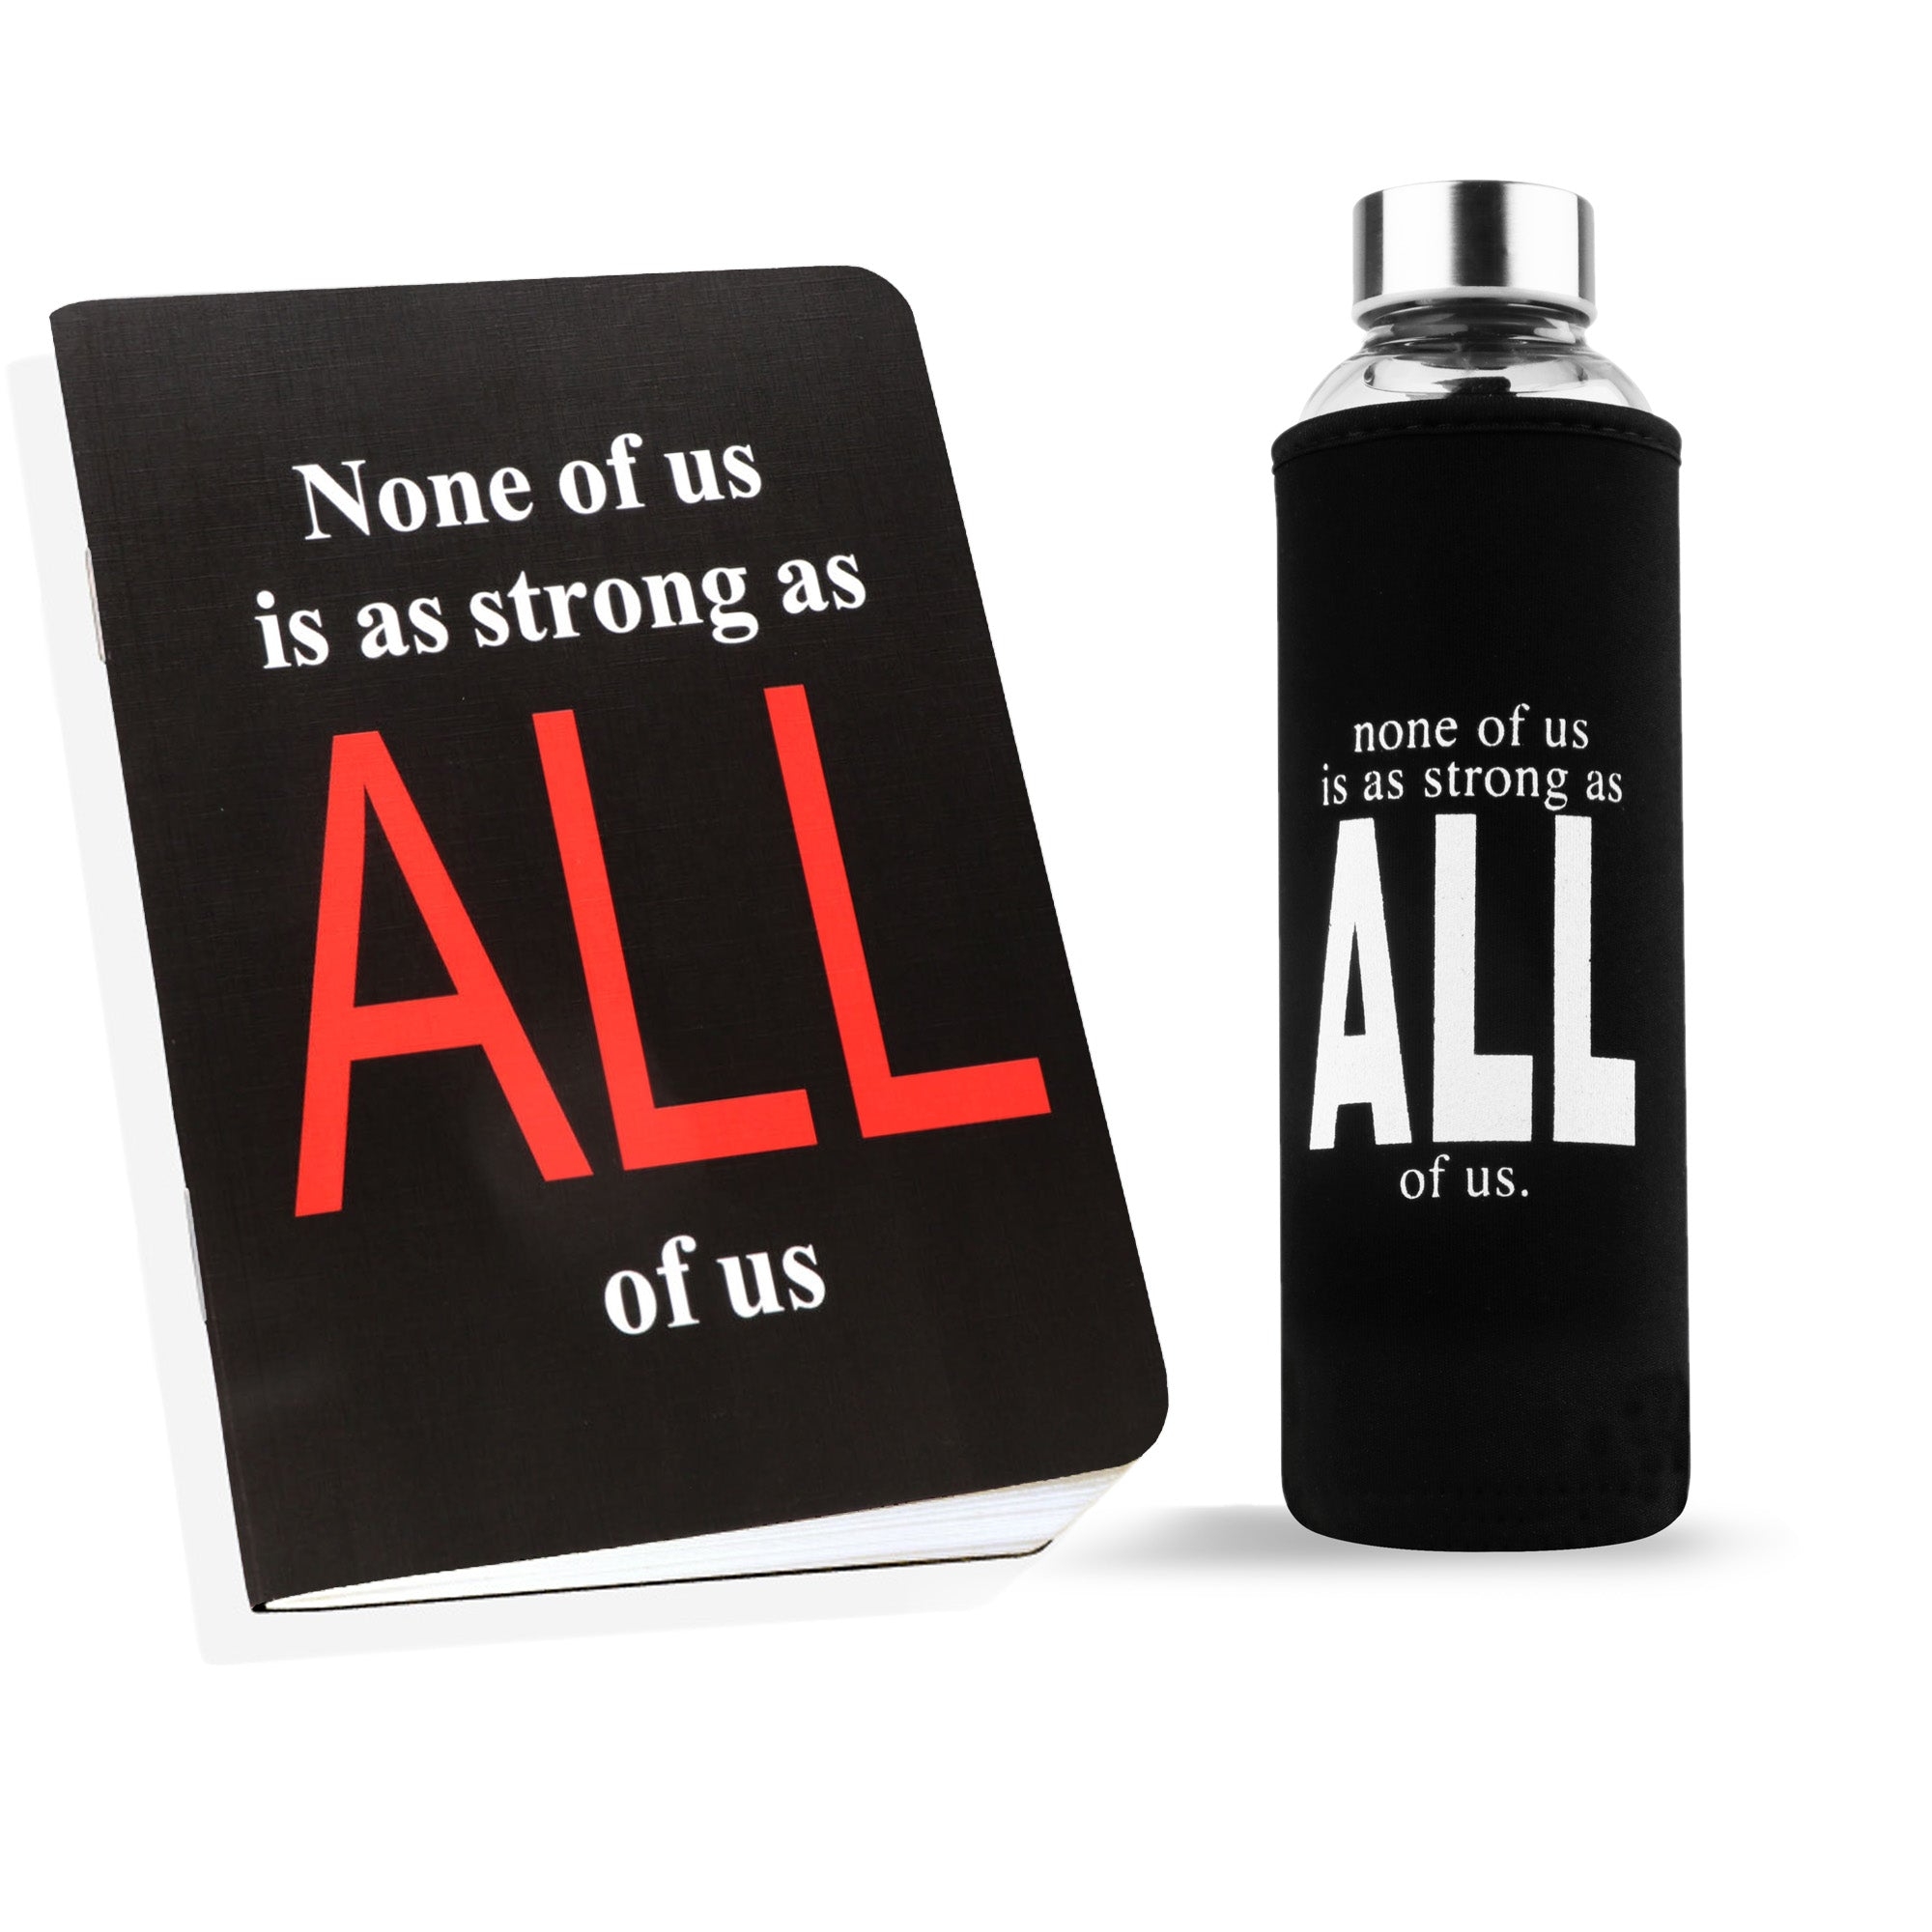 Archies | Archies Printed Glass  Water Bottle With Protector Cover & Notebook combo With Corporate Quote Theme  0